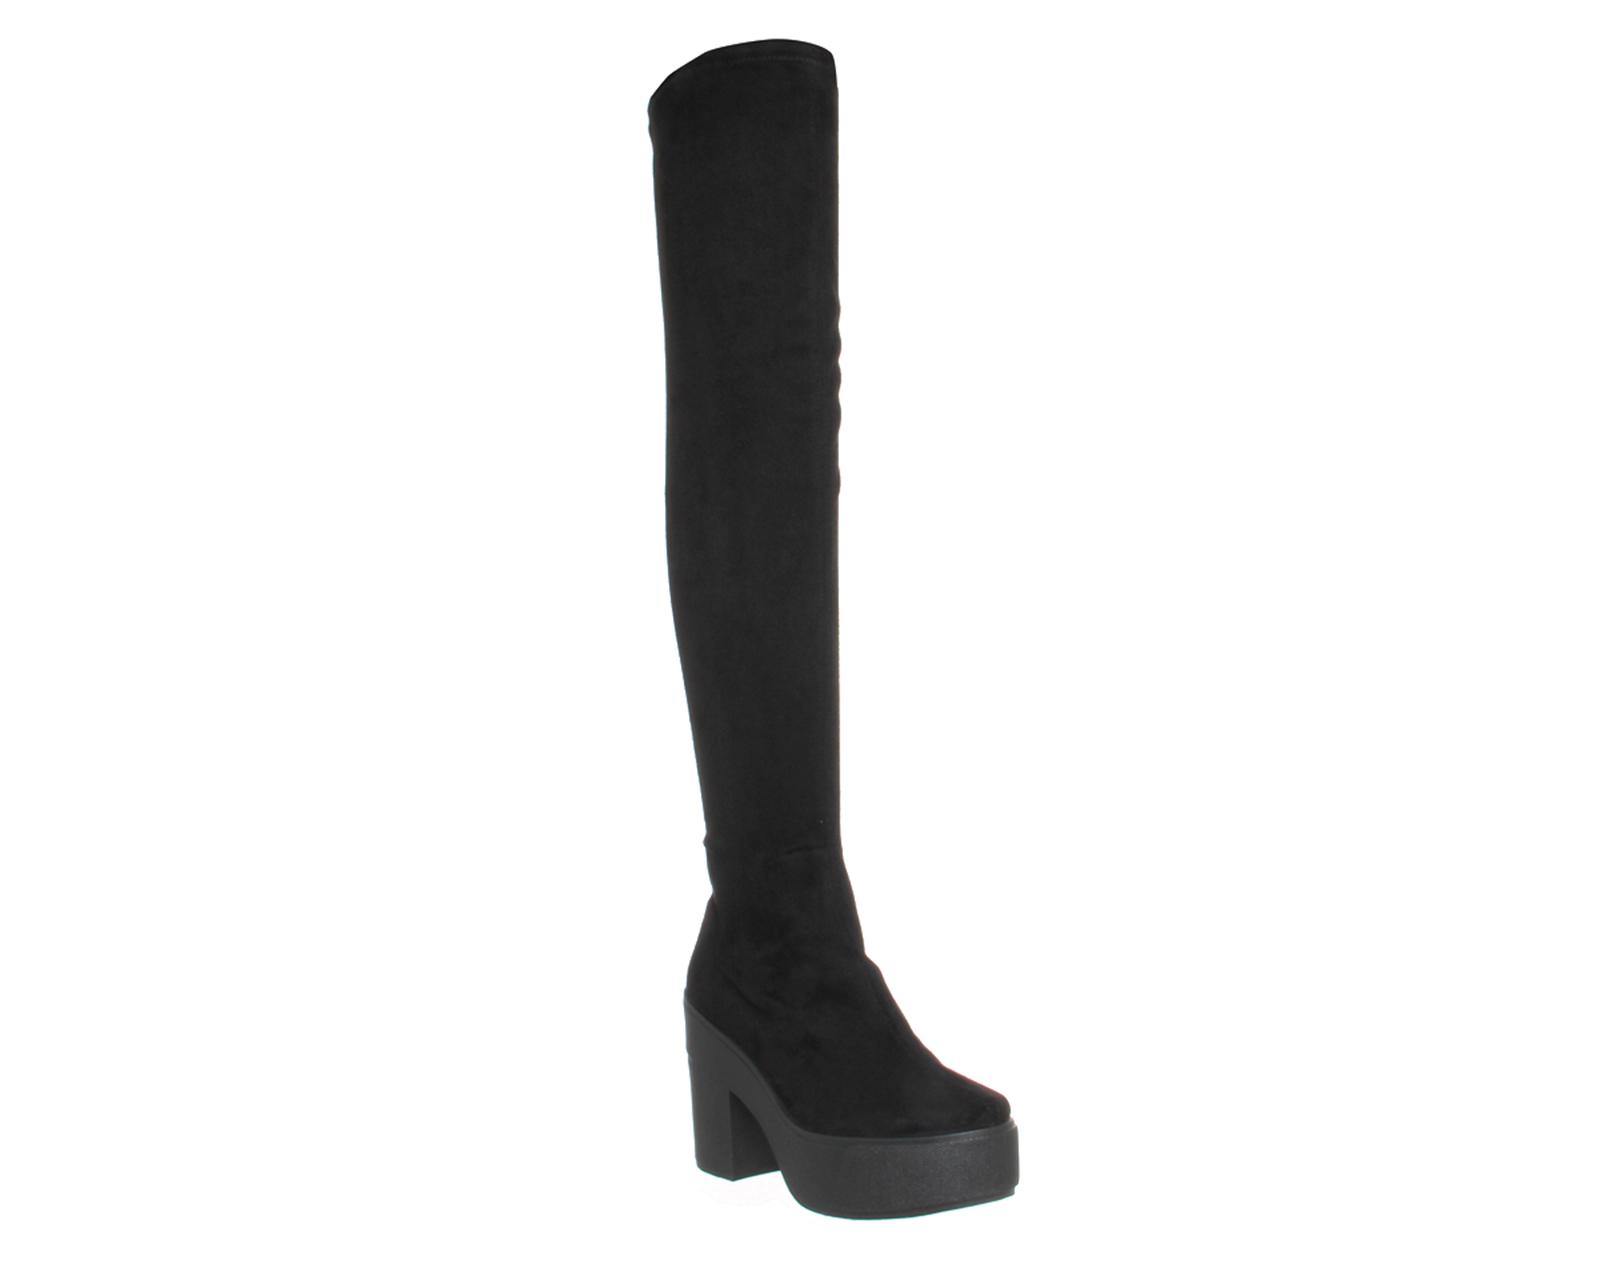 Lyst - Office Naughty Stretch Thigh High Boots in Black